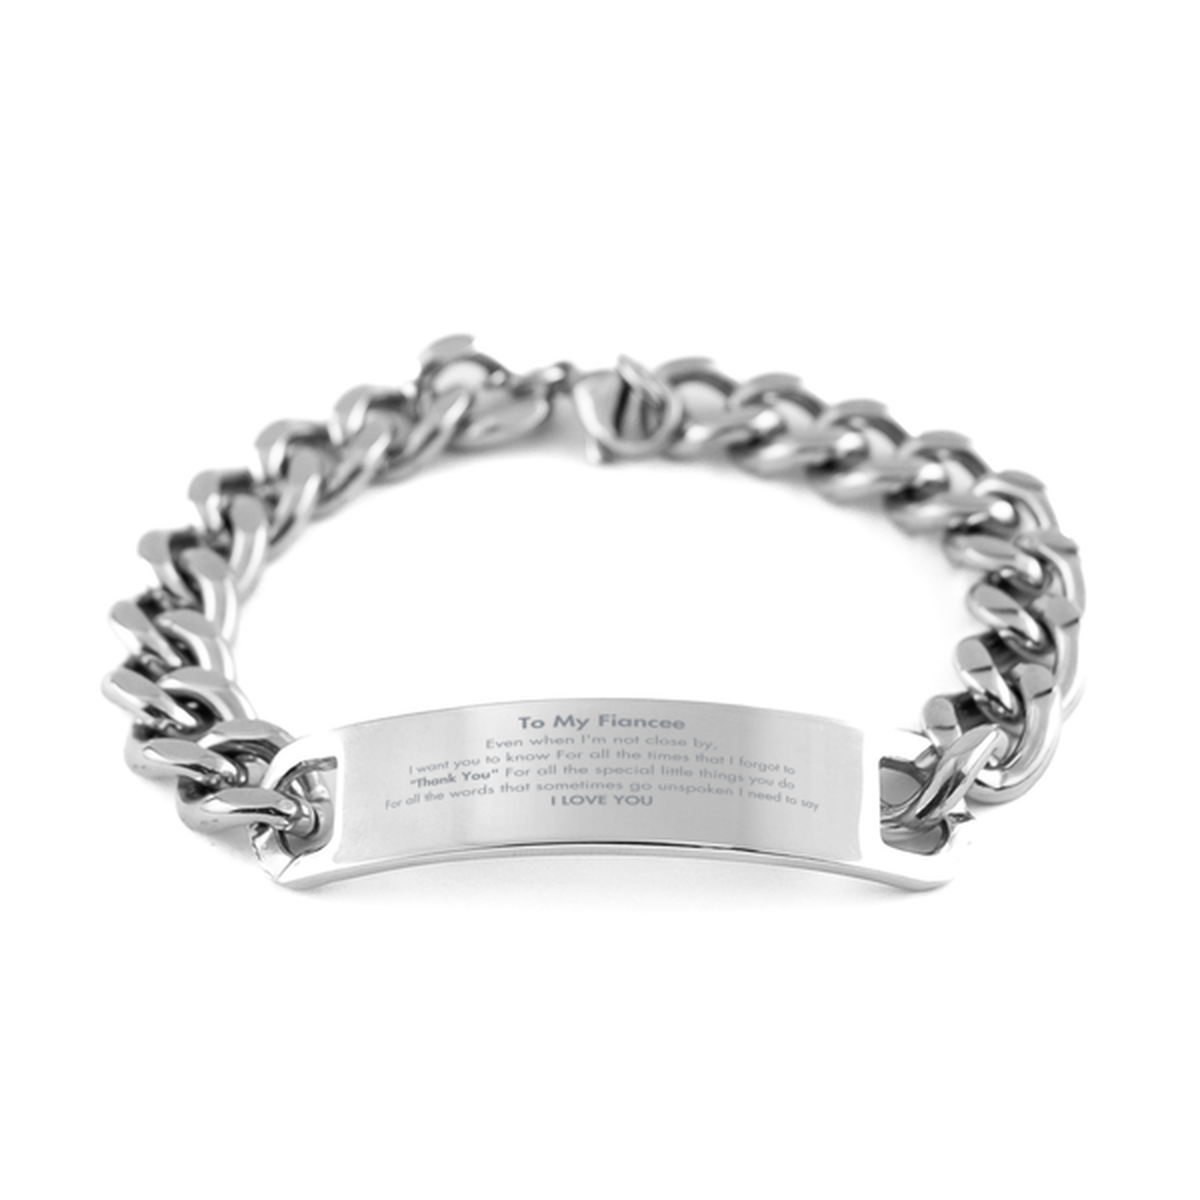 Thank You Gifts for Fiancee, Keepsake Cuban Chain Stainless Steel Bracelet Gifts for Fiancee Birthday Mother's day Father's Day Fiancee For all the words That sometimes go unspoken I need to say I LOVE YOU